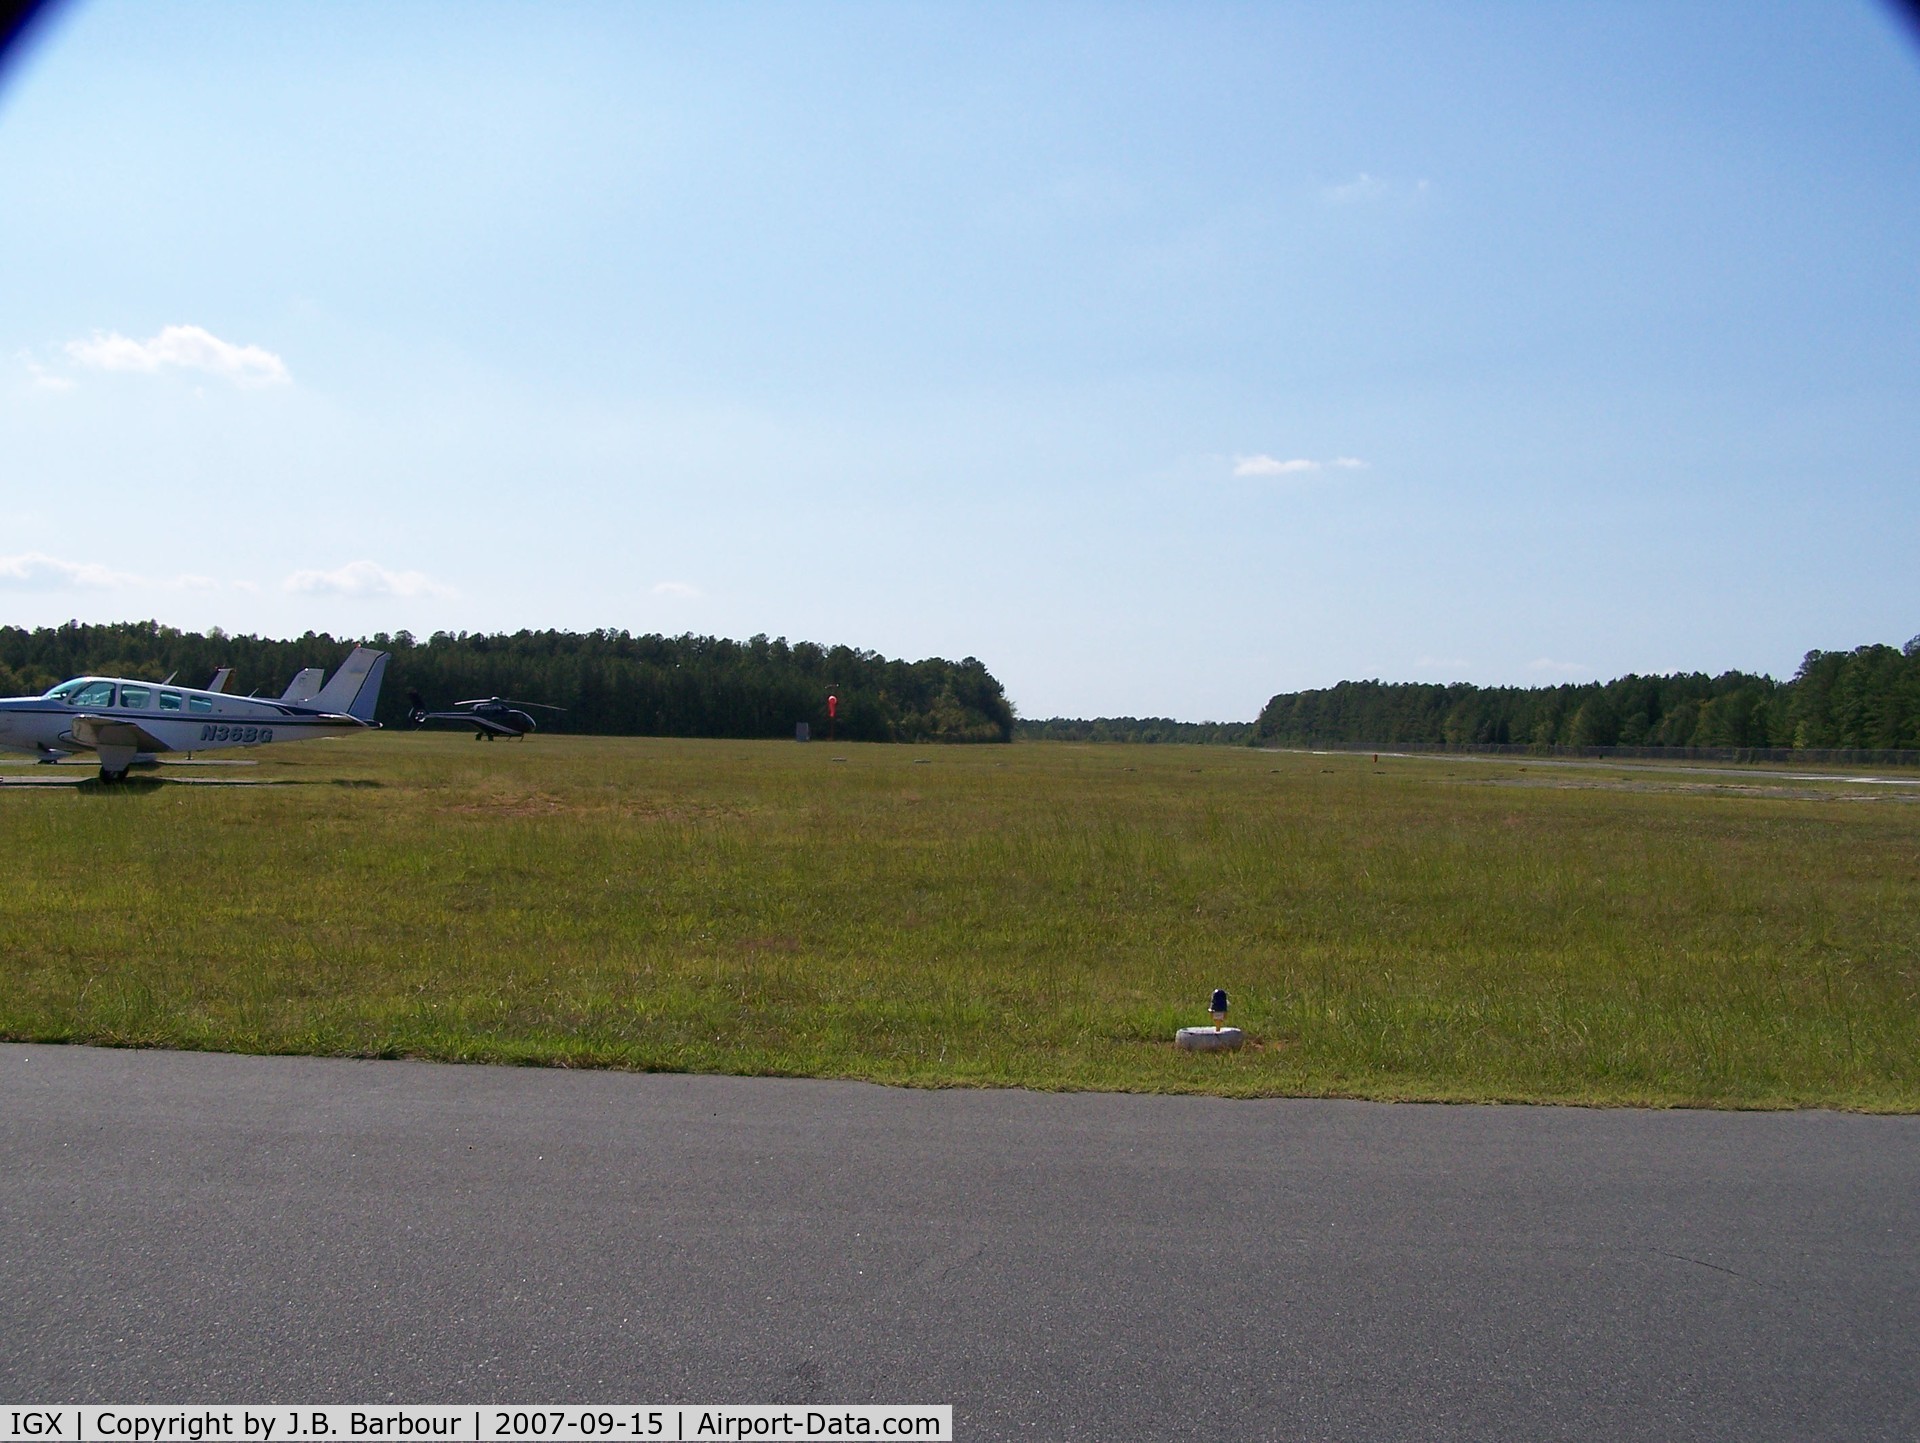 Horace Williams Airport (IGX) - N/A